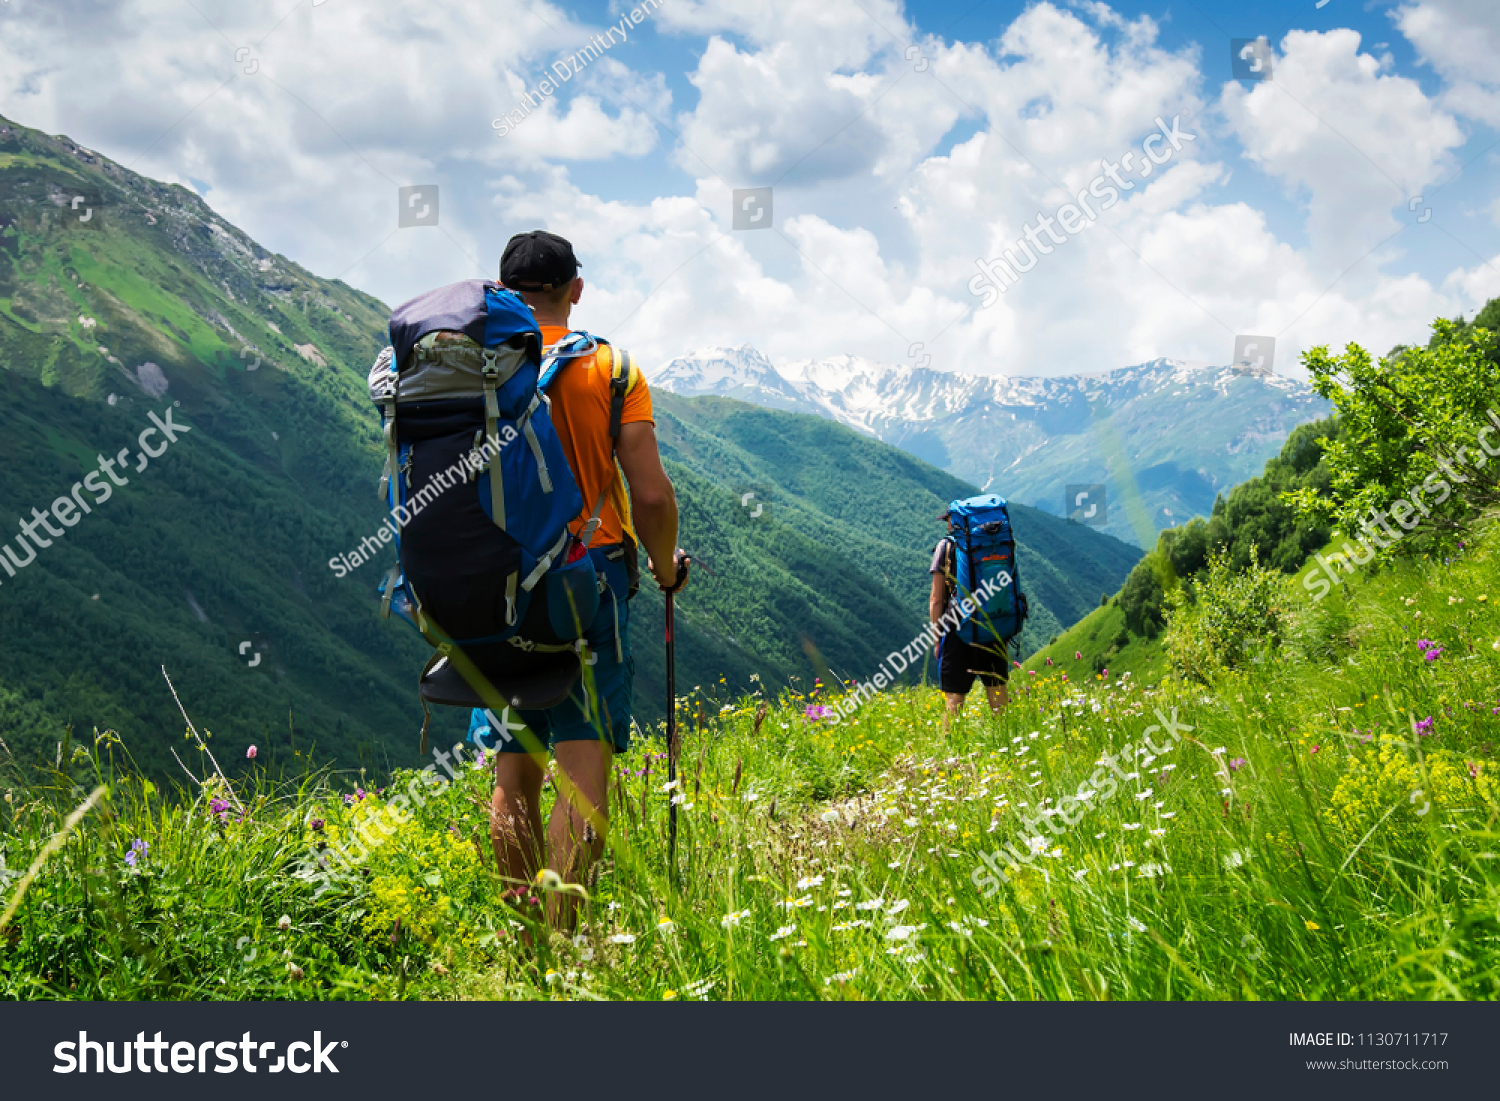 Tourists with hiking backpacks in mountain hike in Svaneti on summer day. Young guys go along the footpath through the mountains of Georgia. Tourists in beautiful mountain landscape. #1130711717